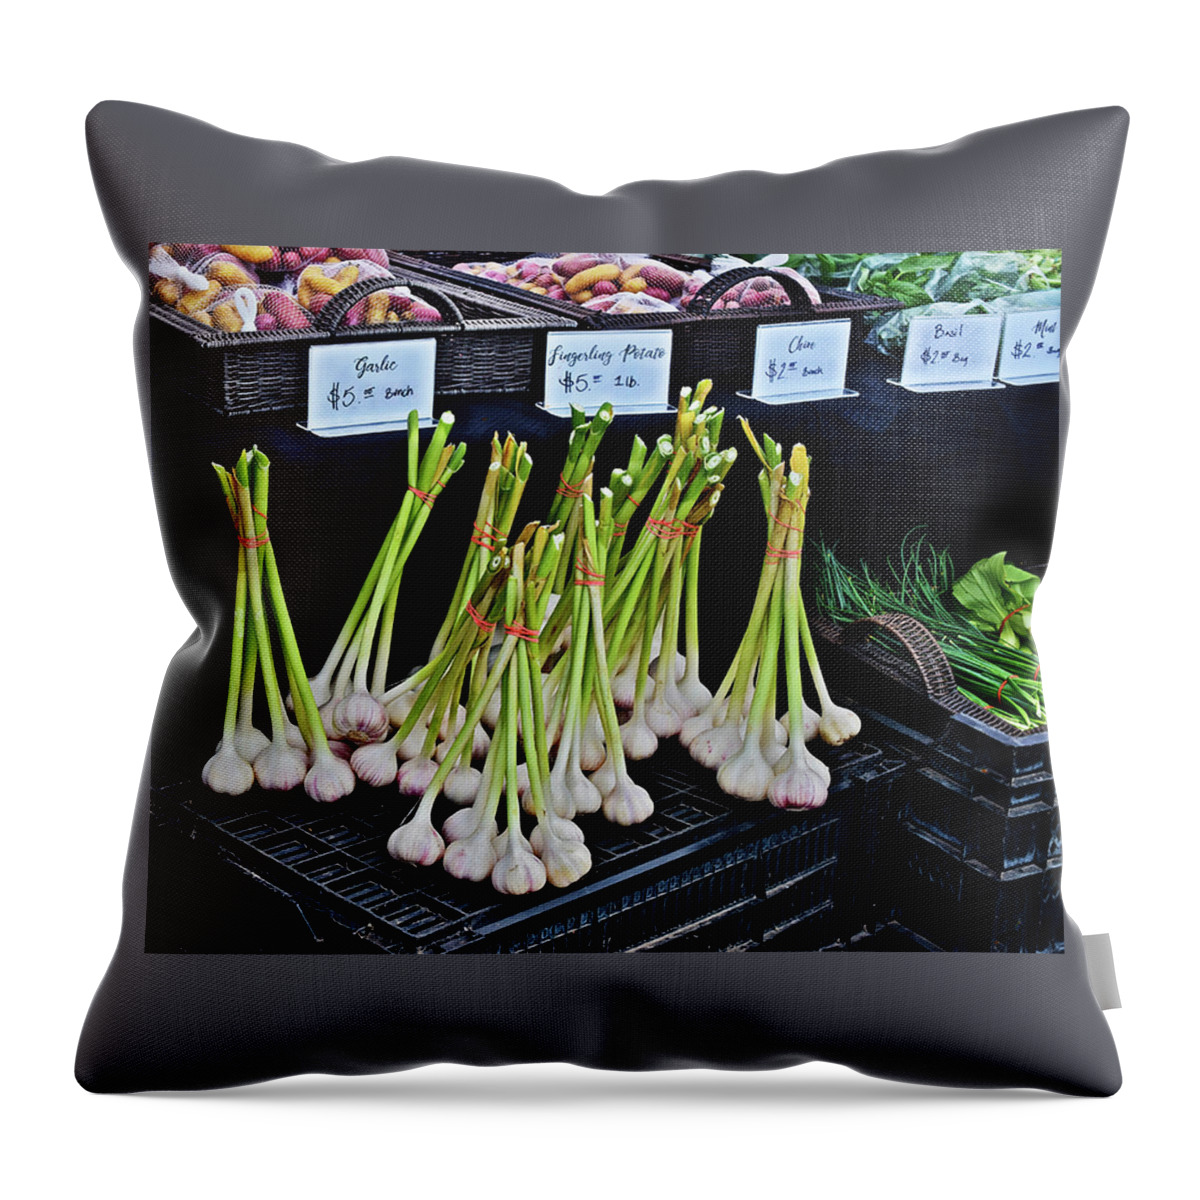 Vegetables Throw Pillow featuring the photograph 2019 Monona Farmers' Market July Vegetables by Janis Senungetuk